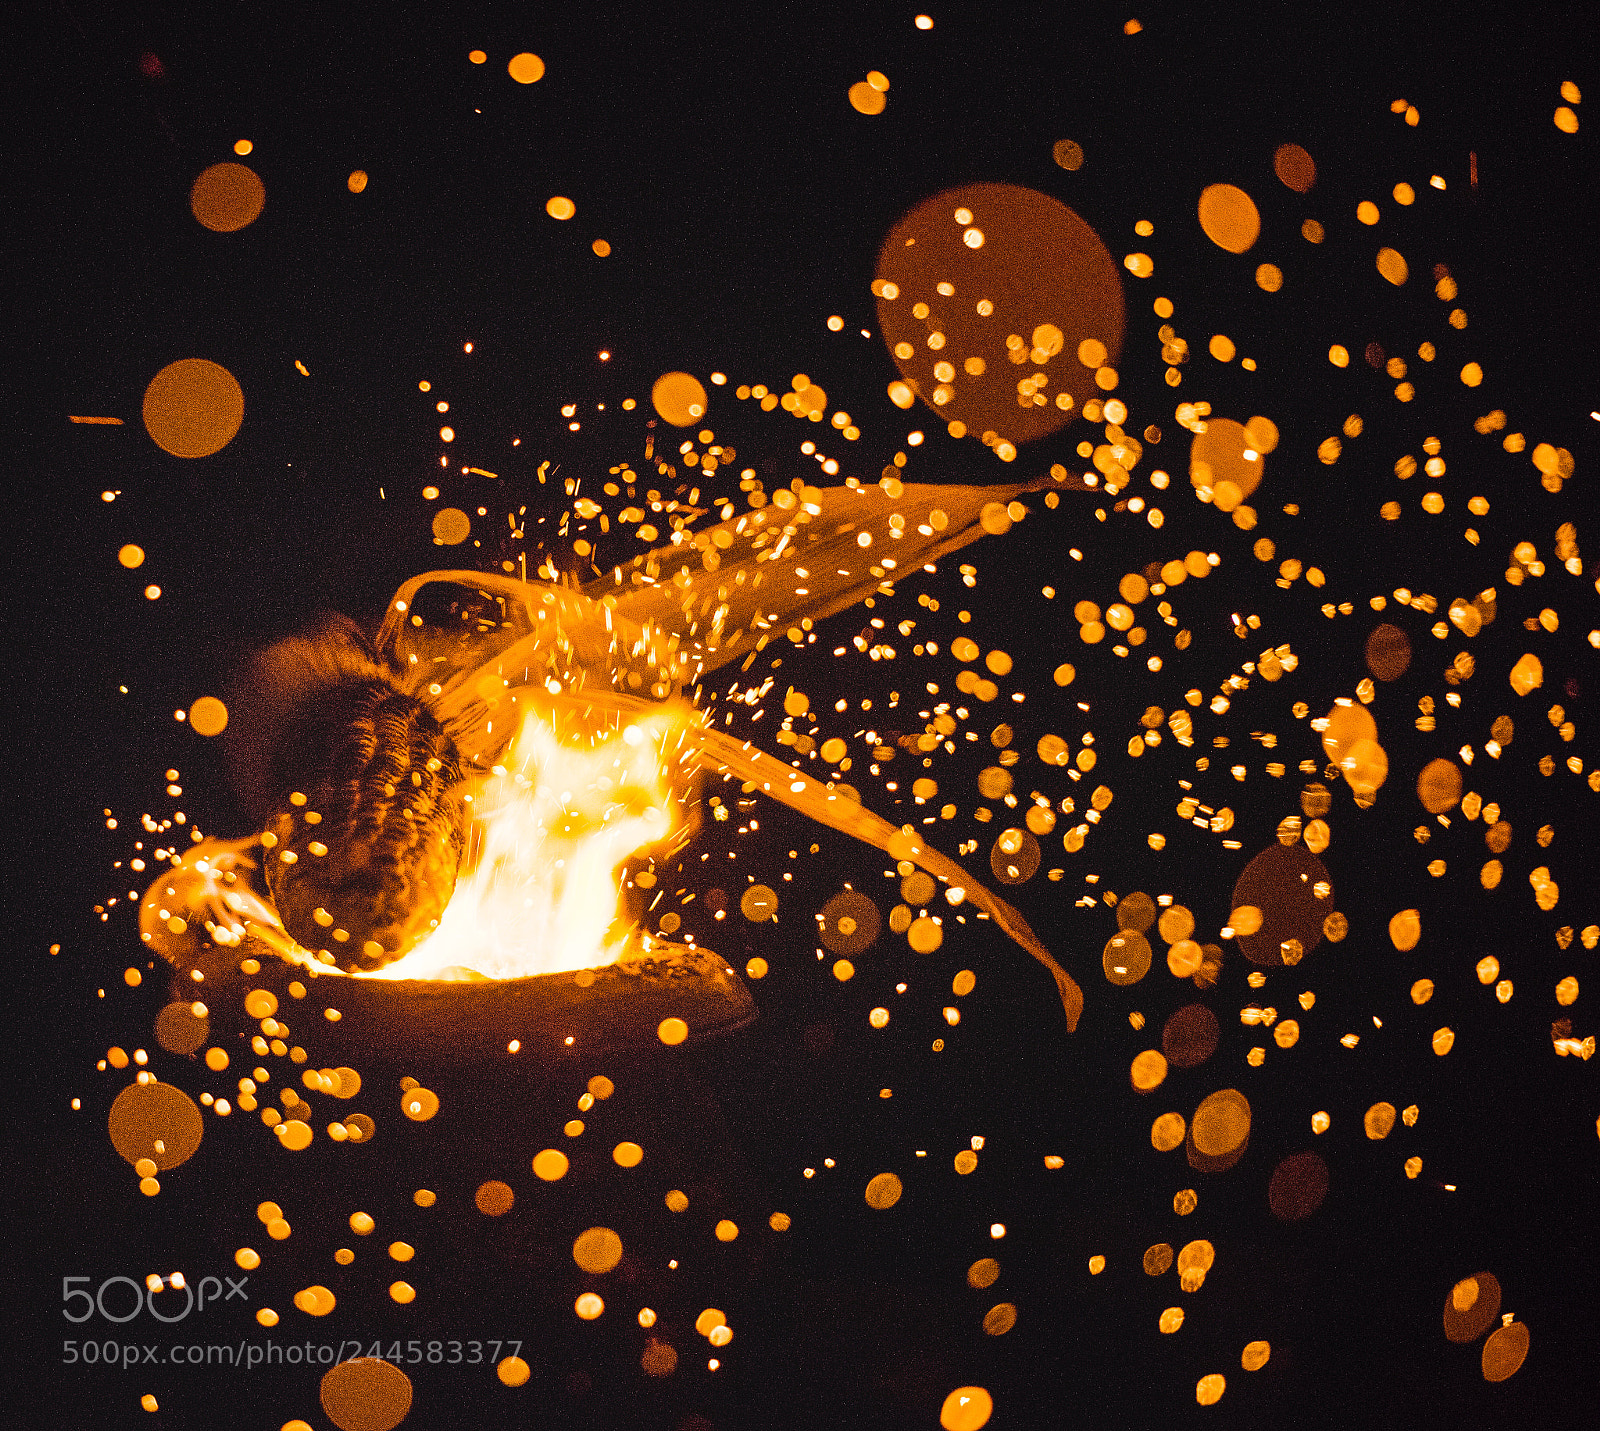 Nikon D810 sample photo. Let the sparks fly photography